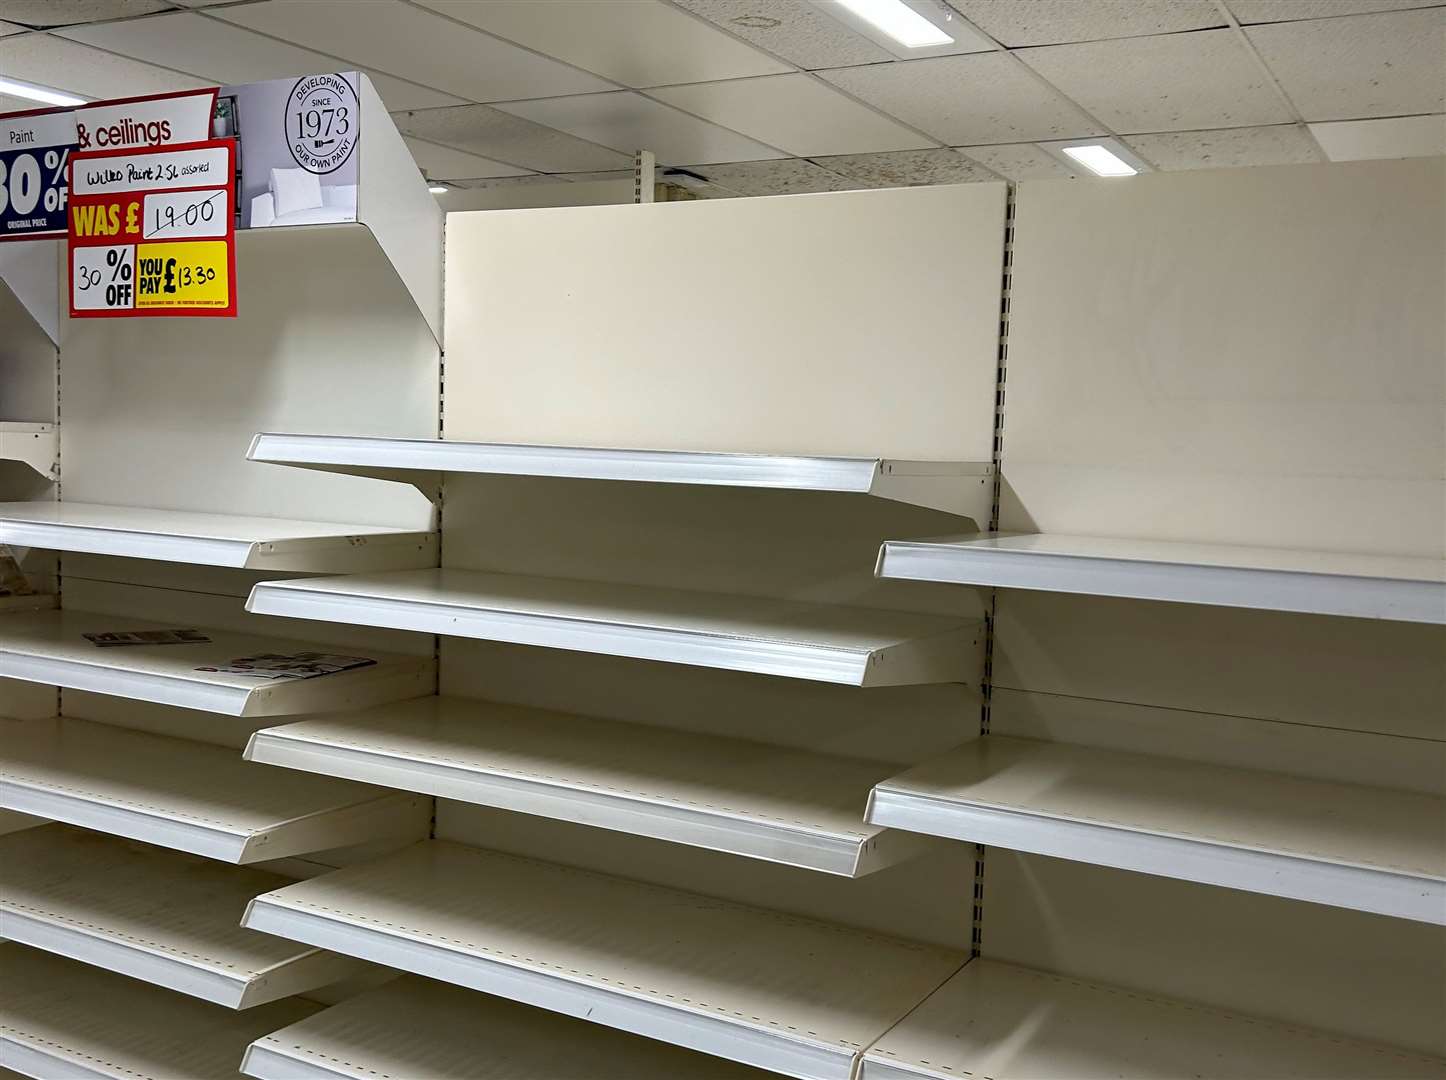 Shelves which used to be packed now empty at Wilko